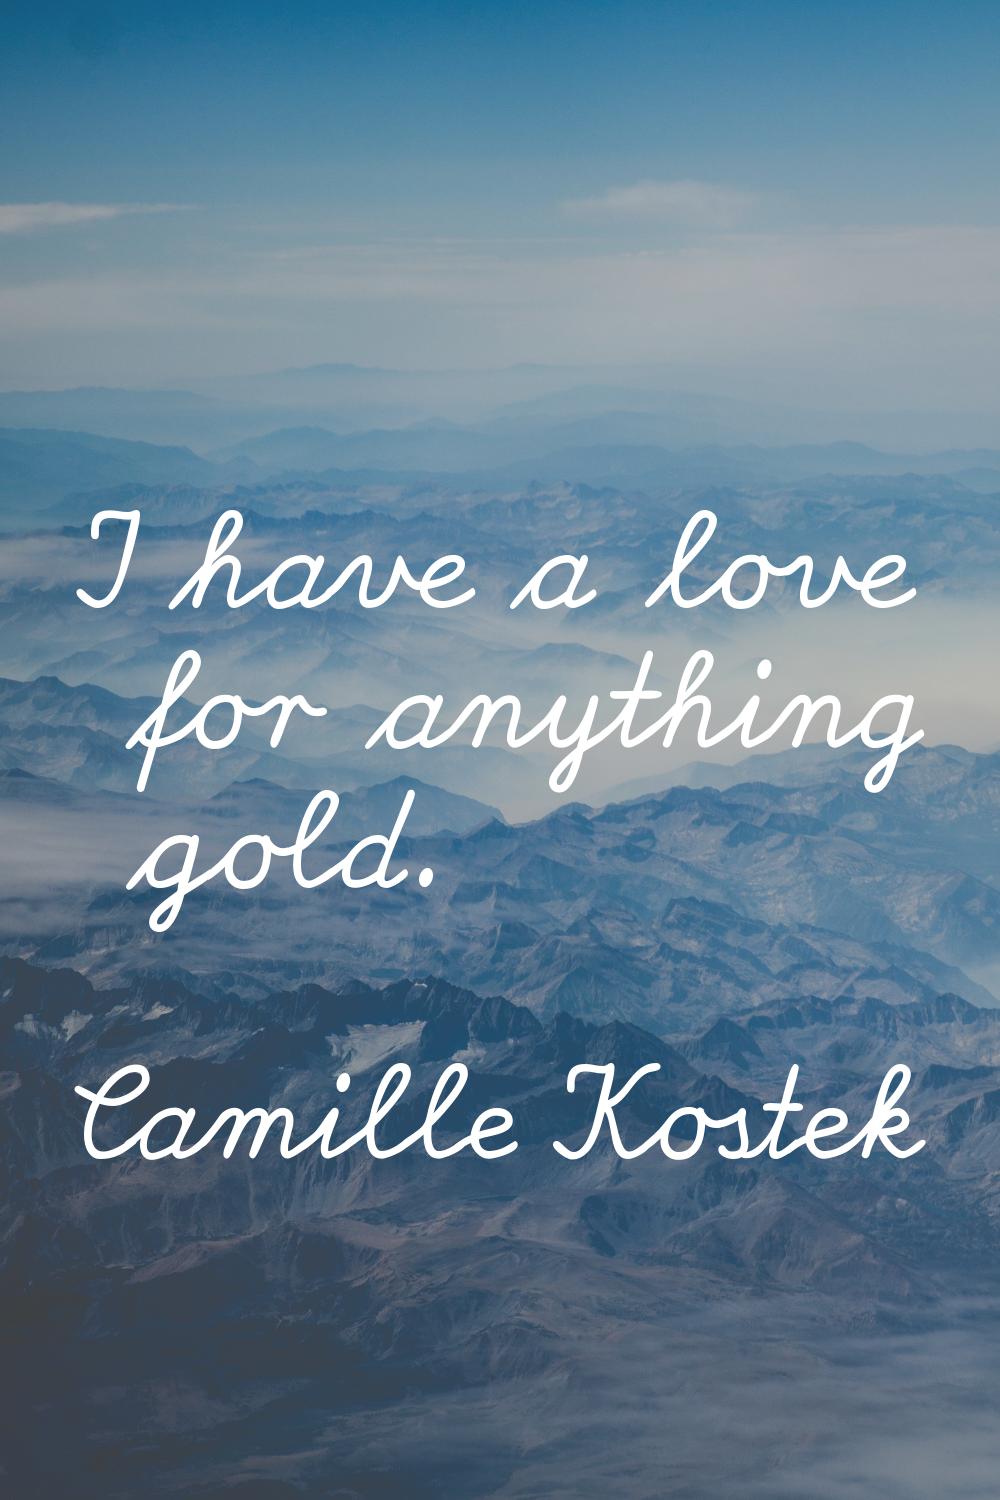 I have a love for anything gold.